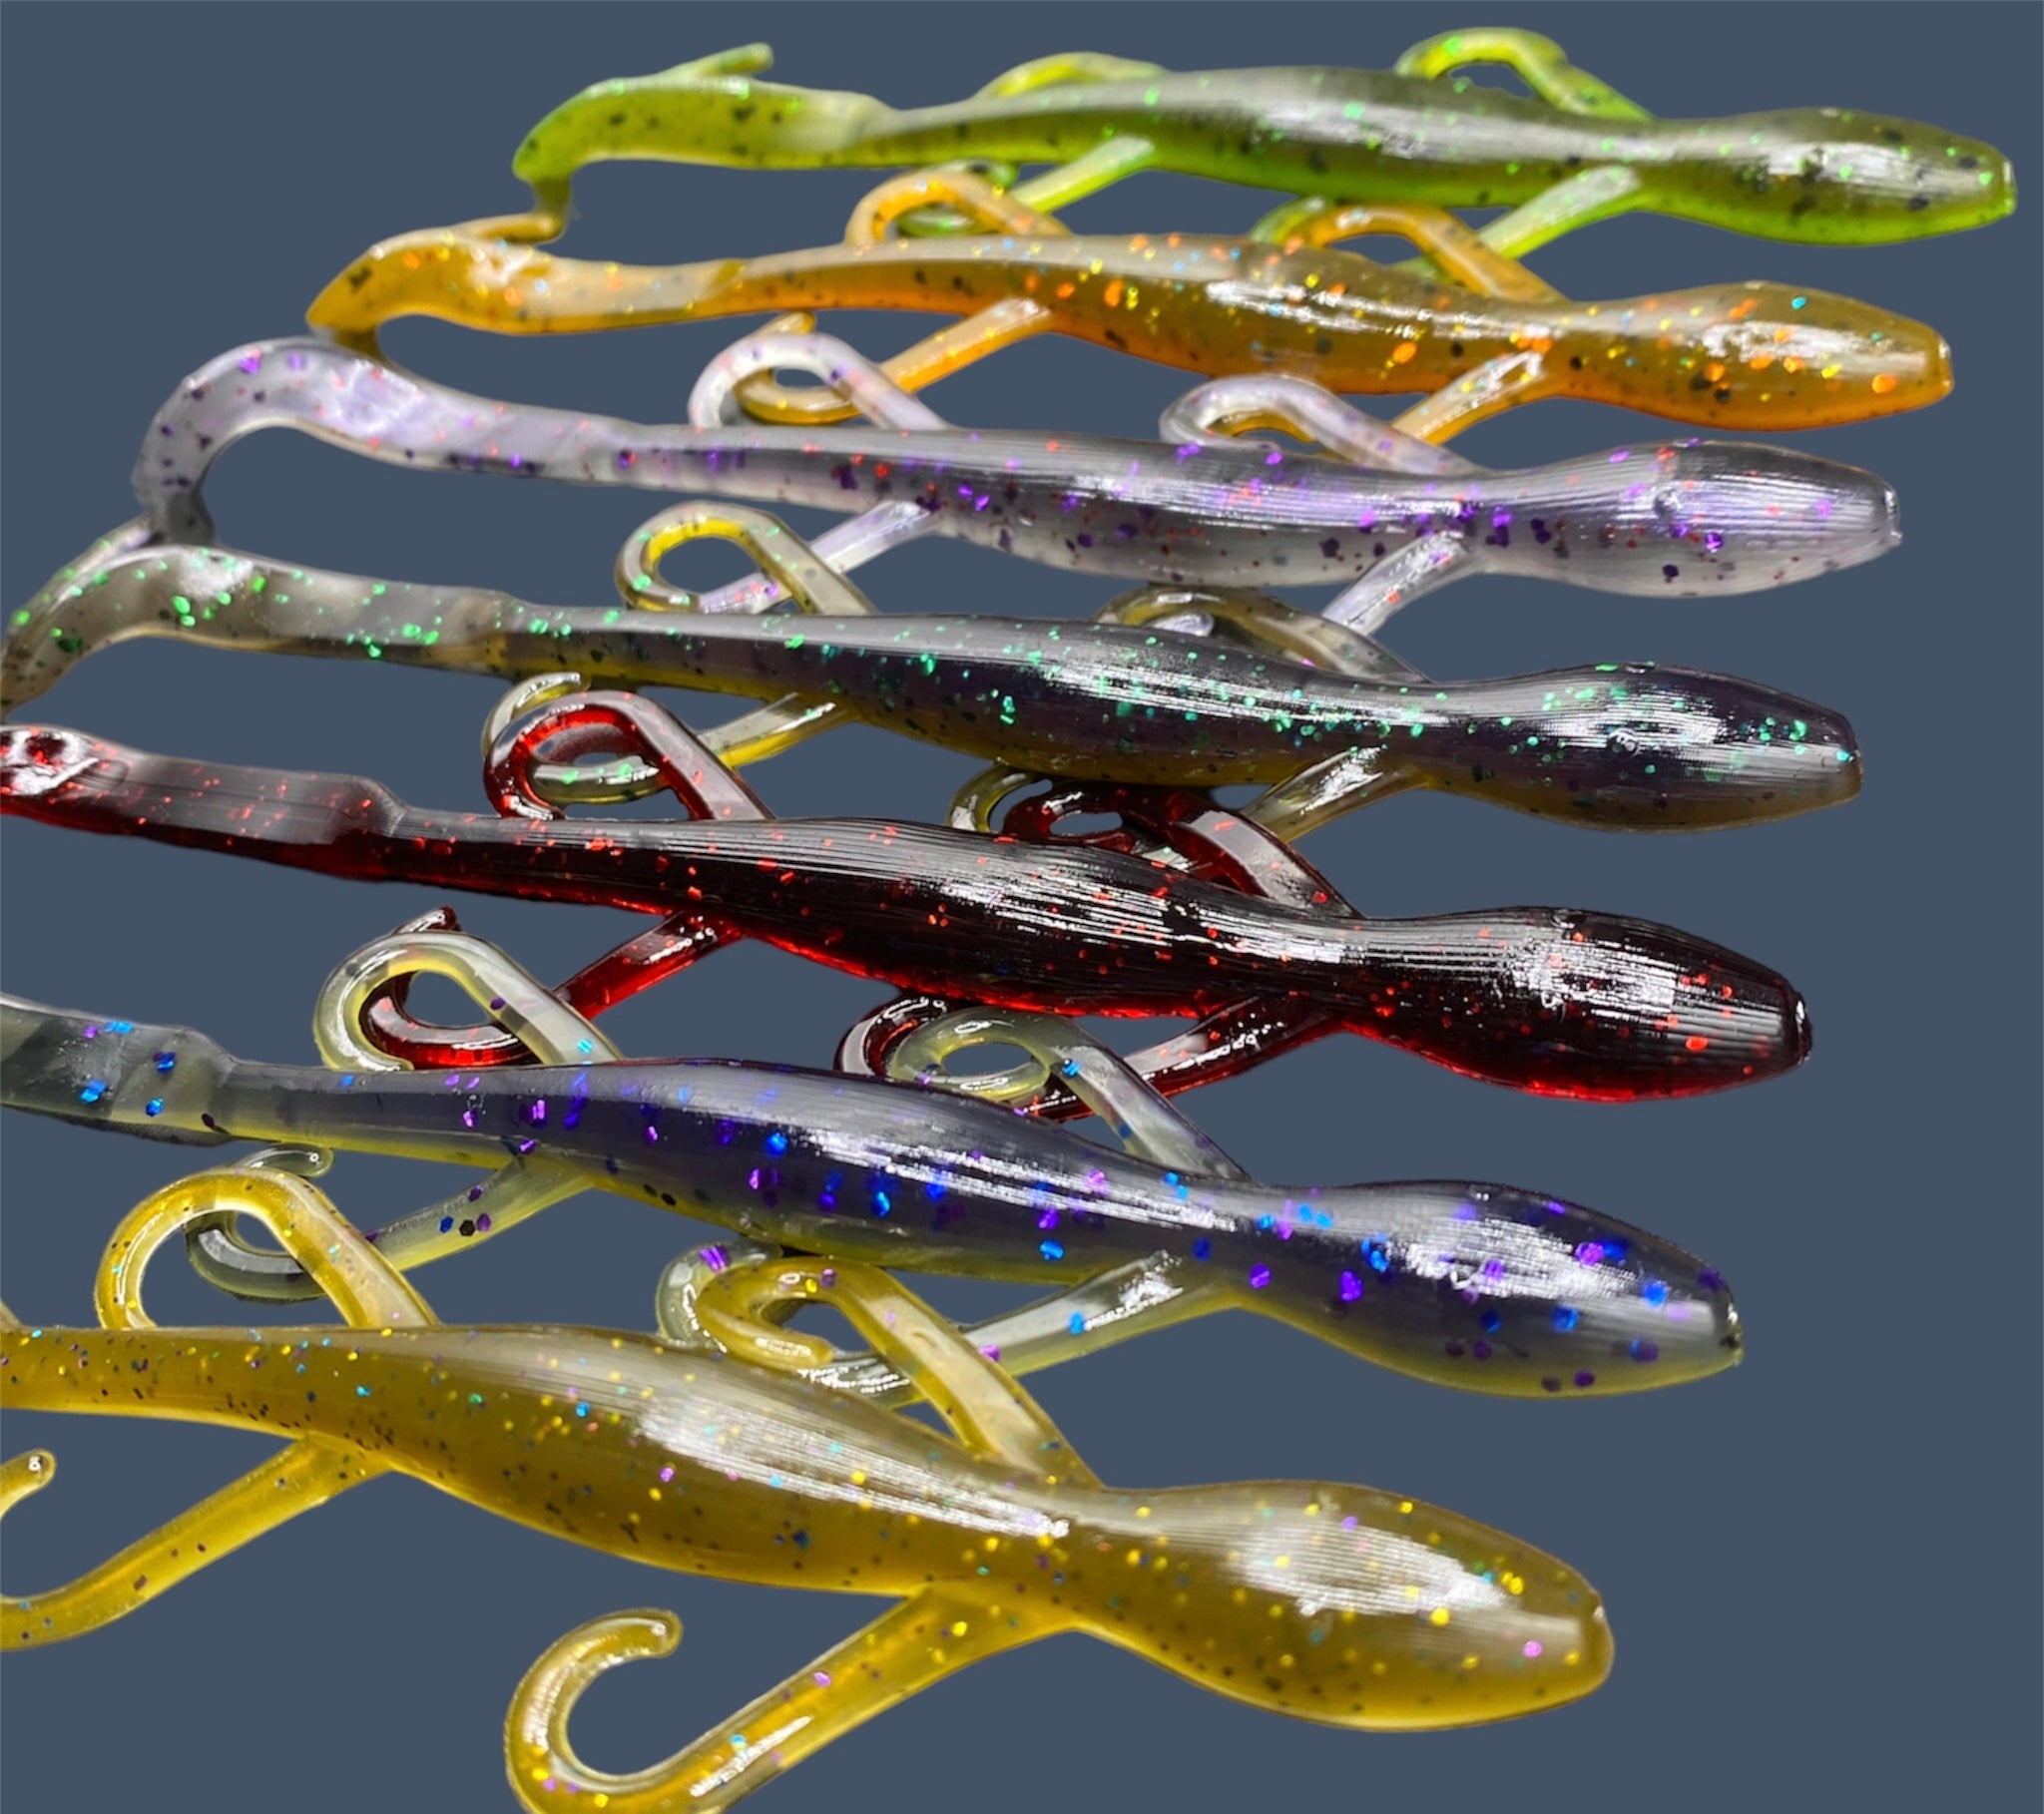 Soft Plastic Lizards Lures and Baits